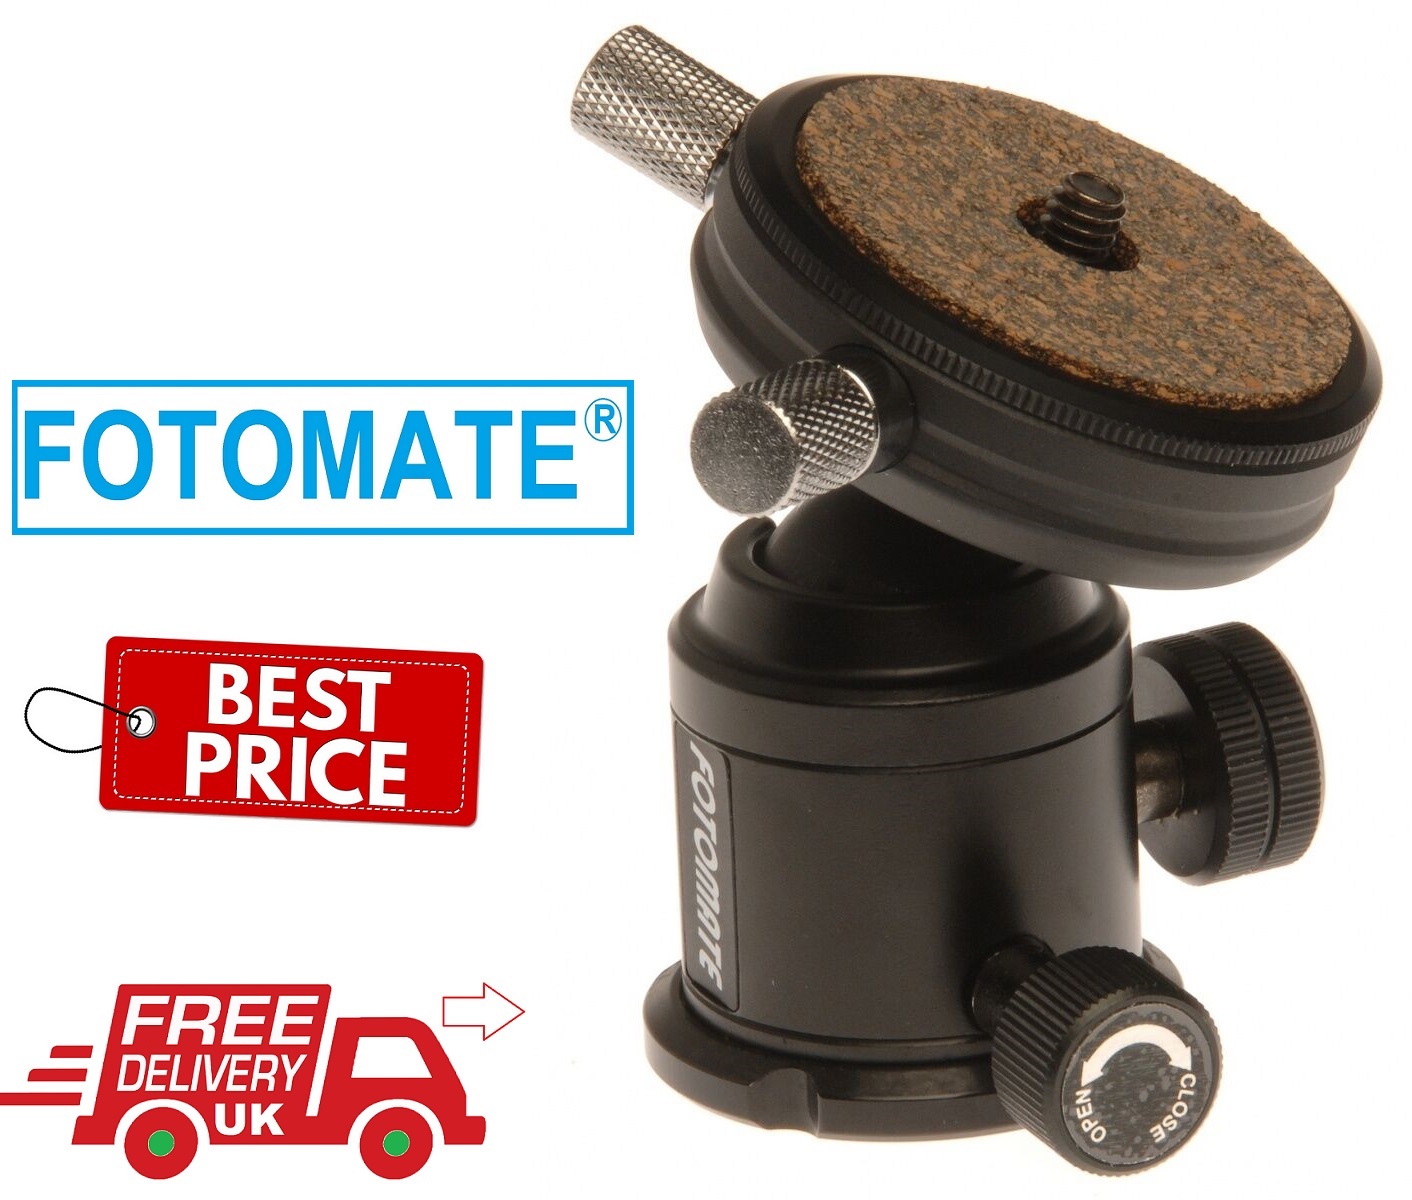 Fotomate H-26 Tripod Ball Head With Quick-Release Platform